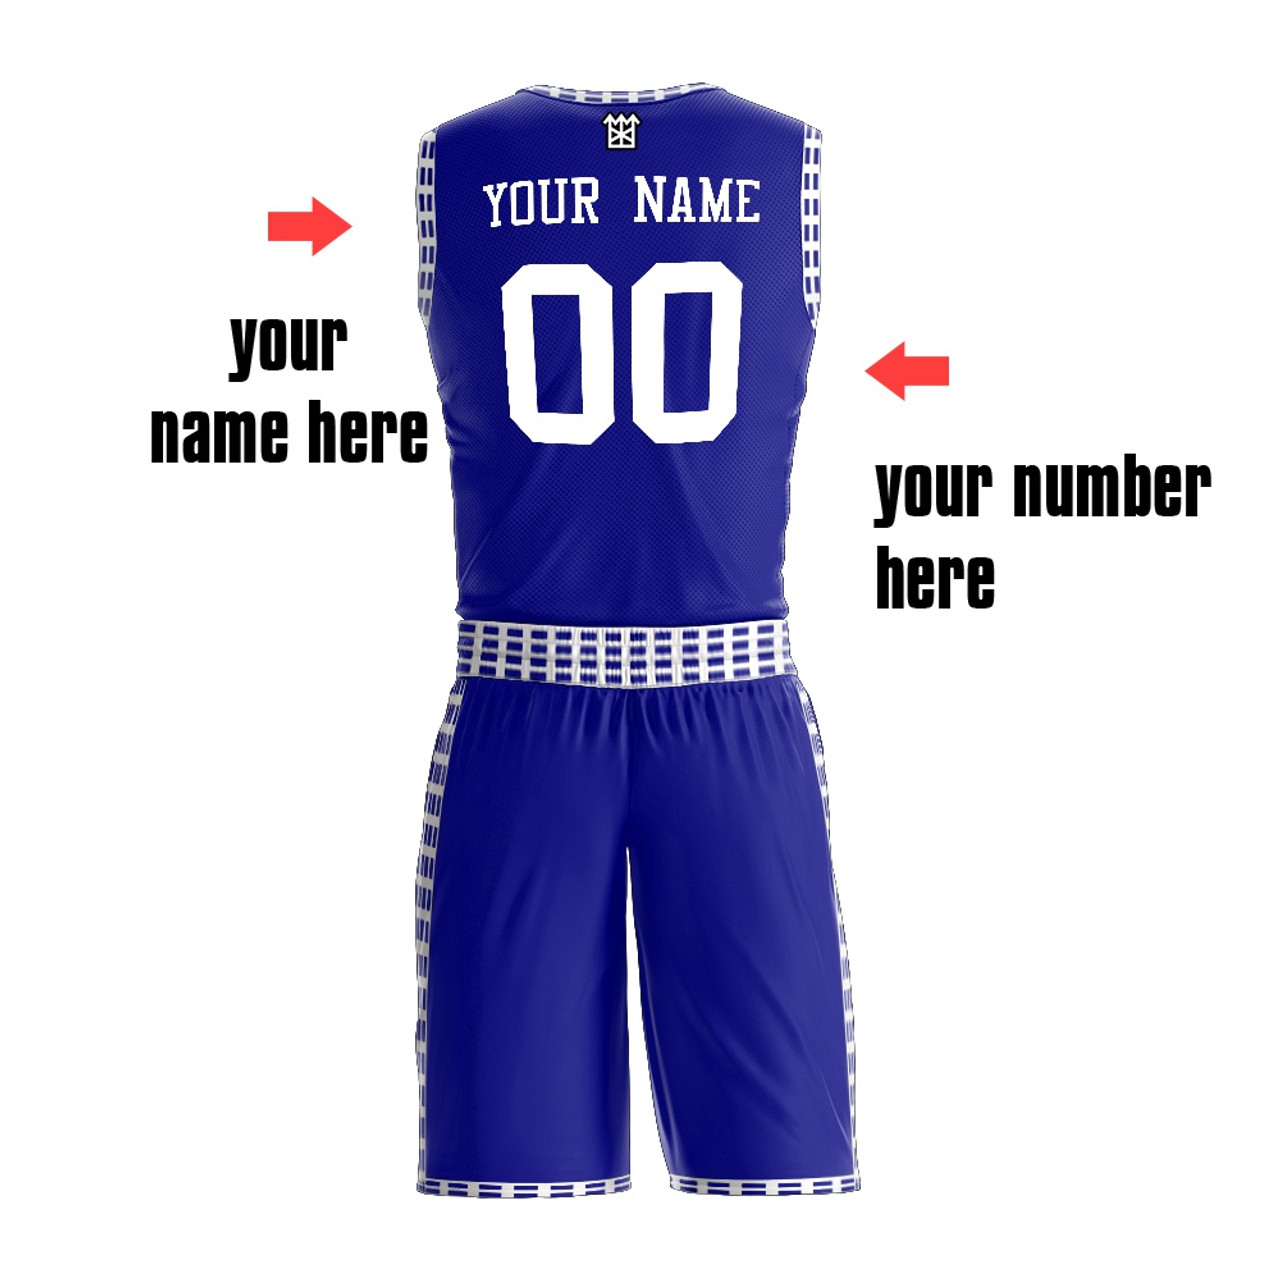 100% Polyester Basketball Vest And Shorts Color Royal Blue And White Custom  Design Reversible Basketball